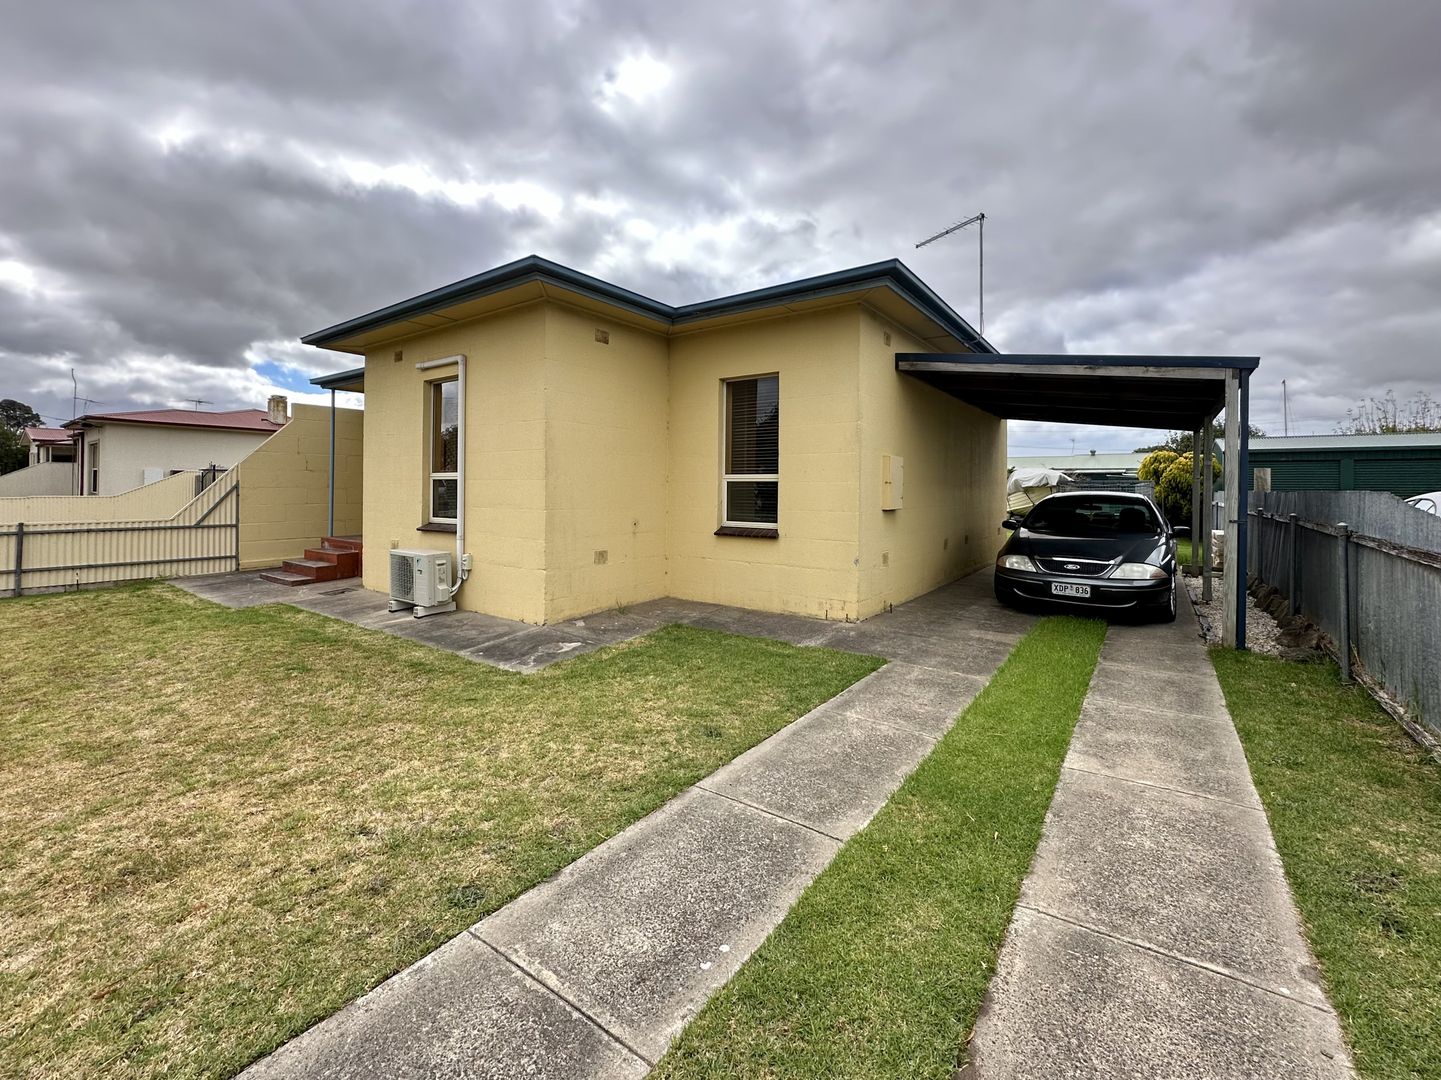 15 WHENNEN STREET, Millicent SA 5280, Image 1